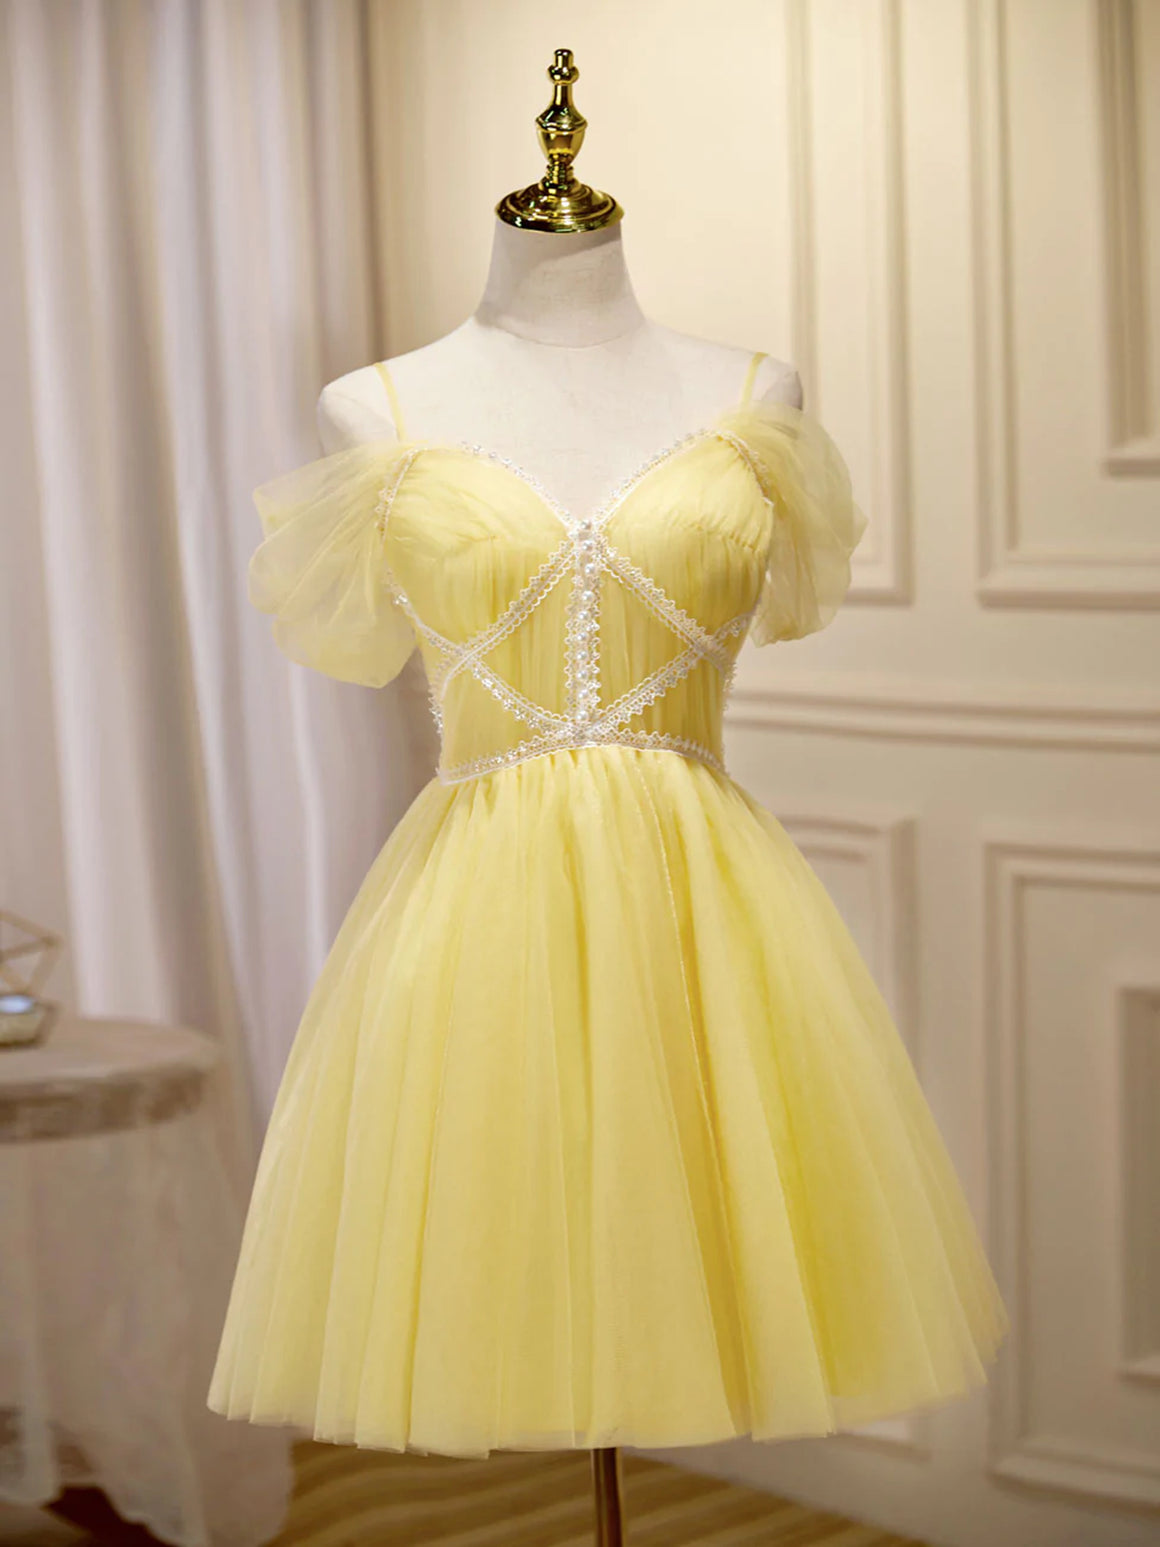 Off the Shoulder Short Yellow Prom Dresses, Off Shoulder Short Yellow Formal Graduation Dresses